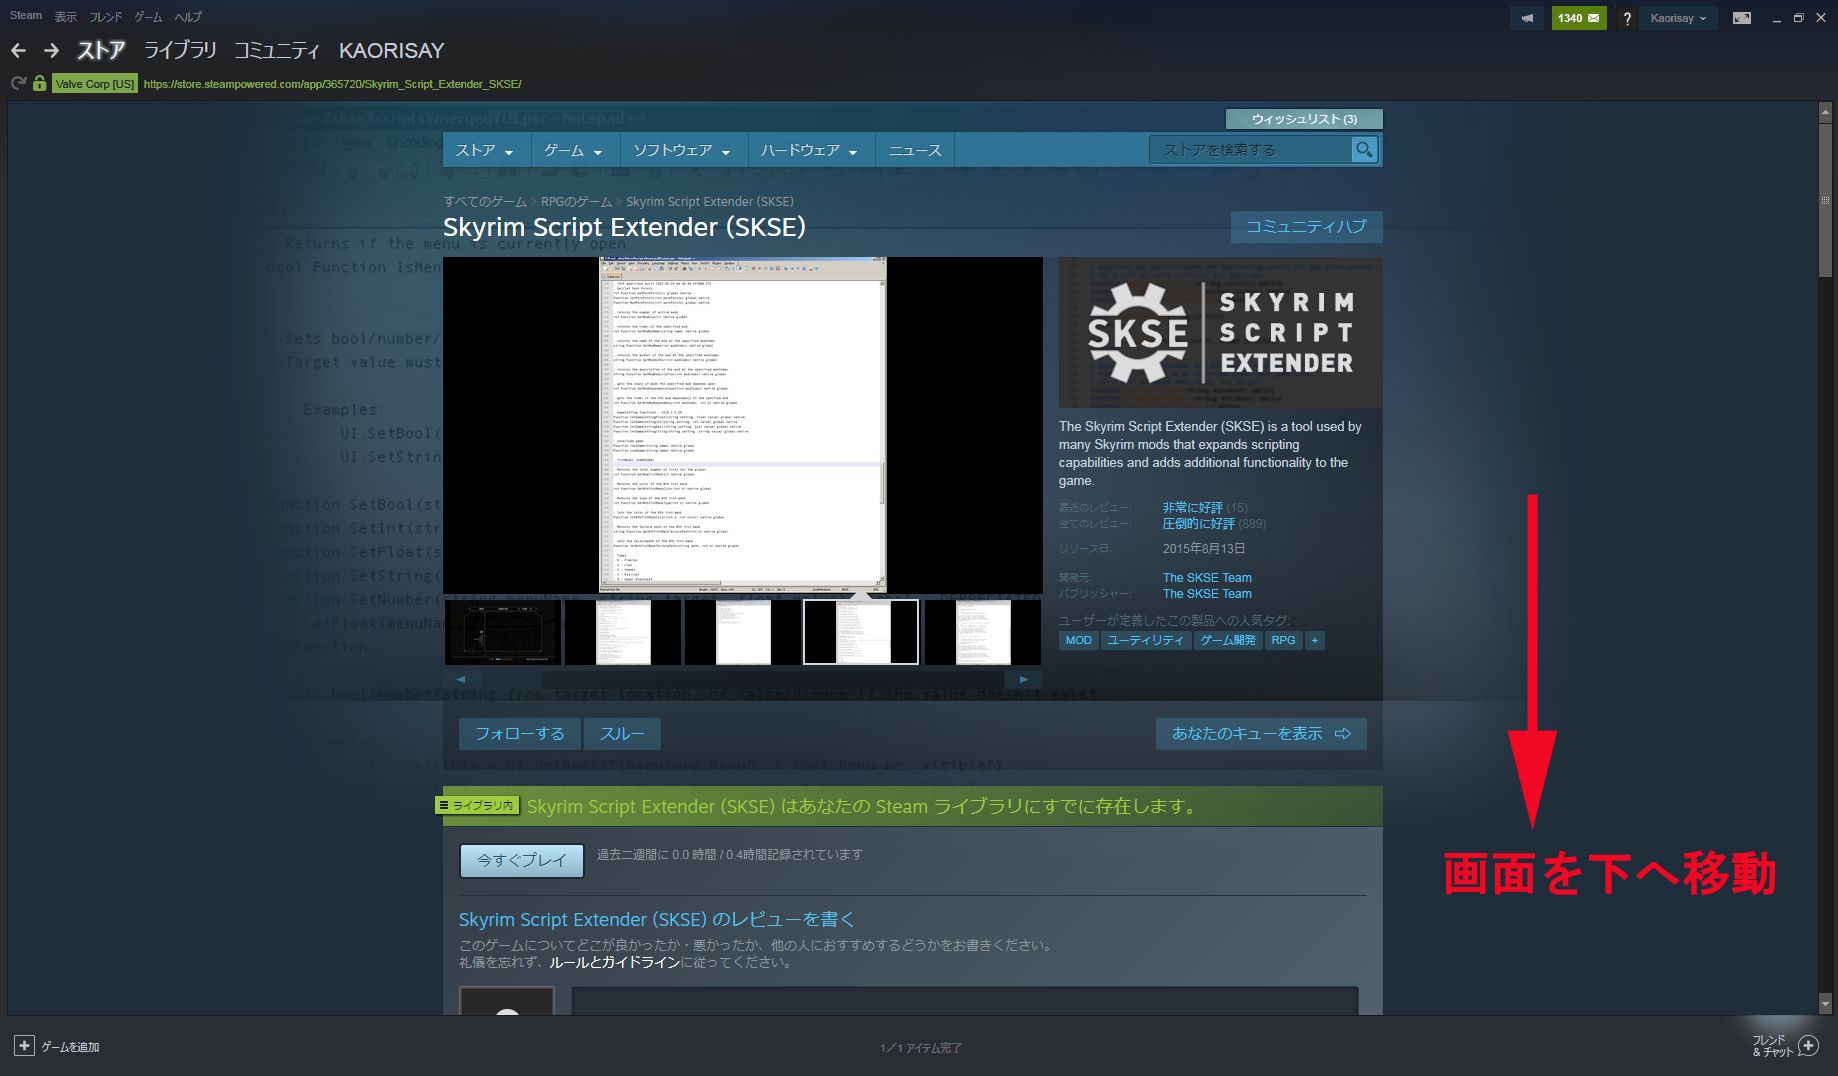 wdoes downloading skyrim skse on steam automatically change skyrim